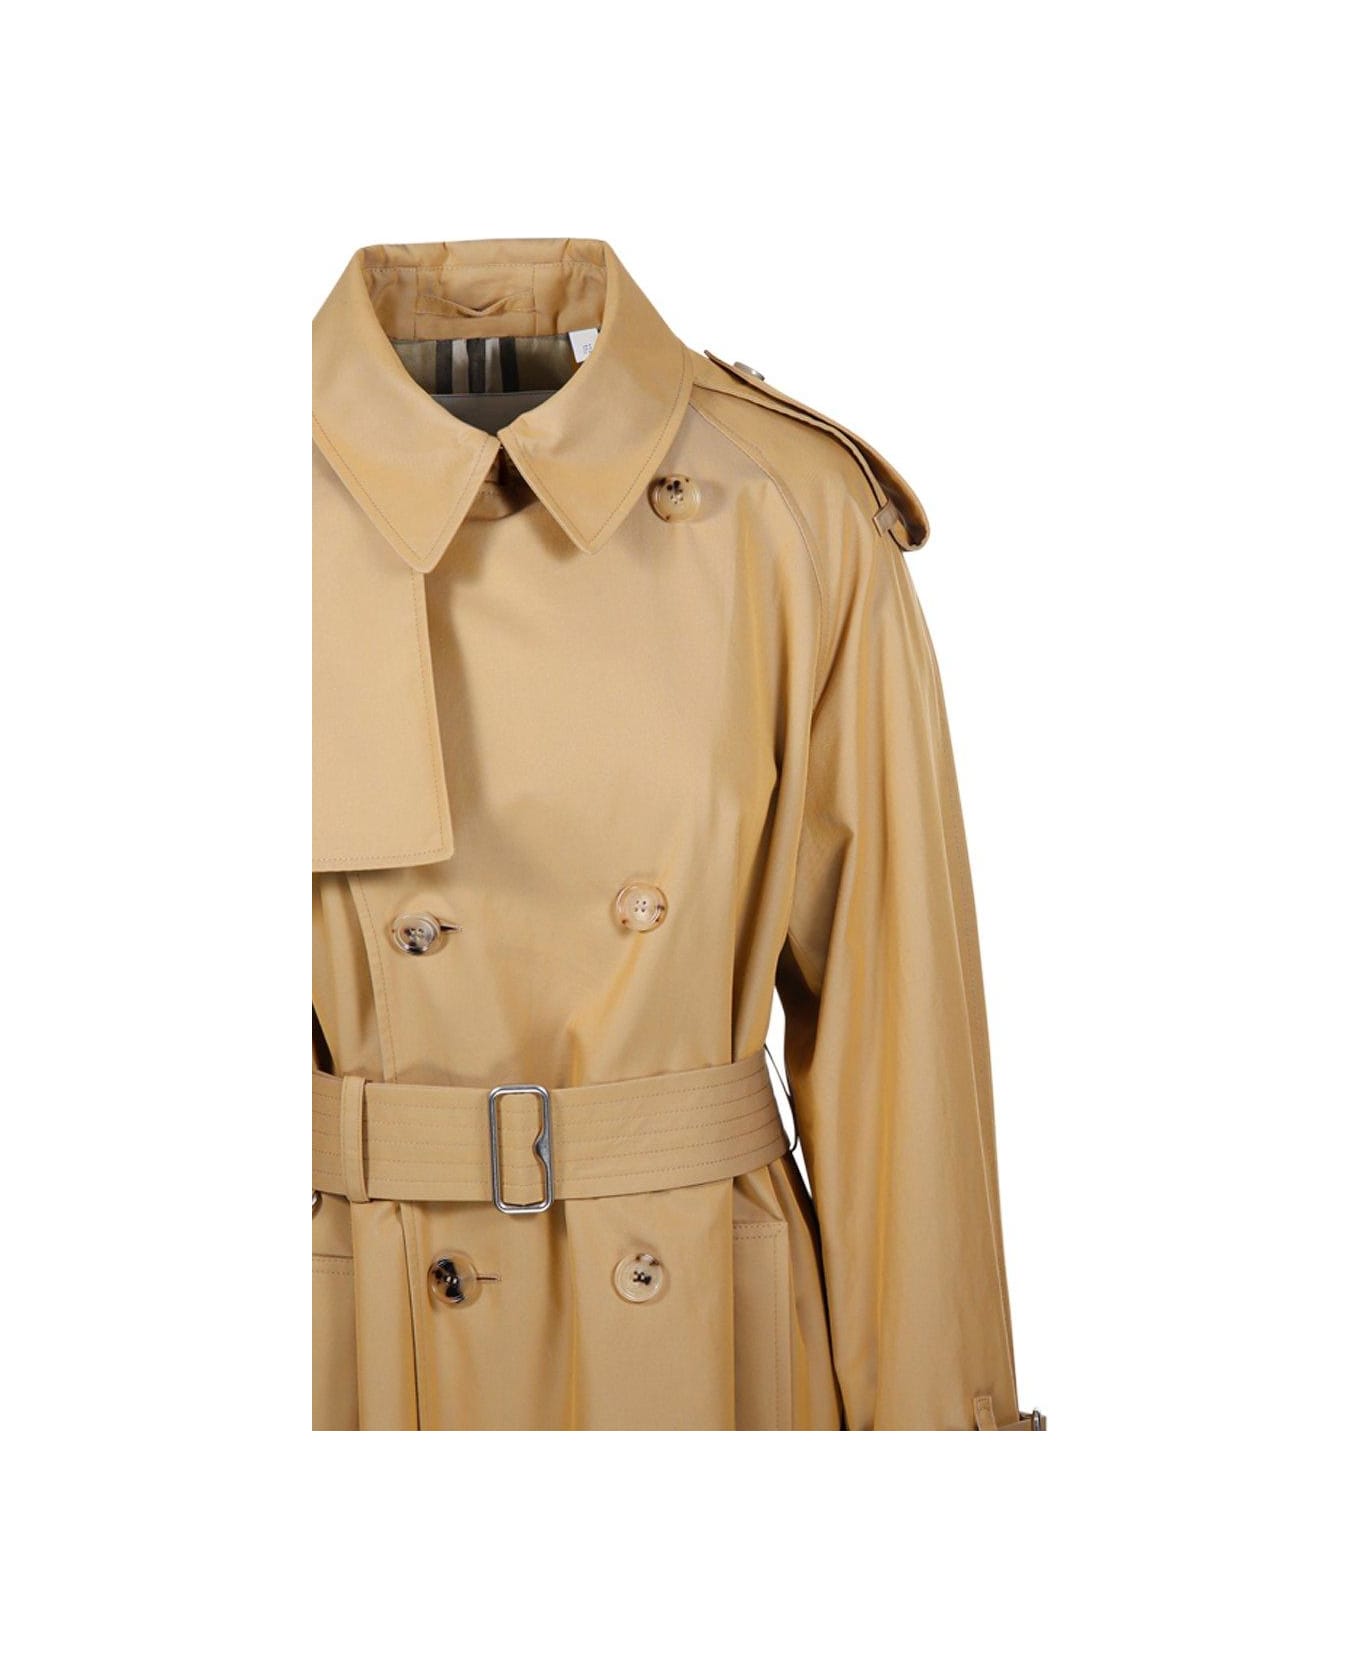 Burberry Kensington Heritage Double Breasted Belted Trench Coat - Beige